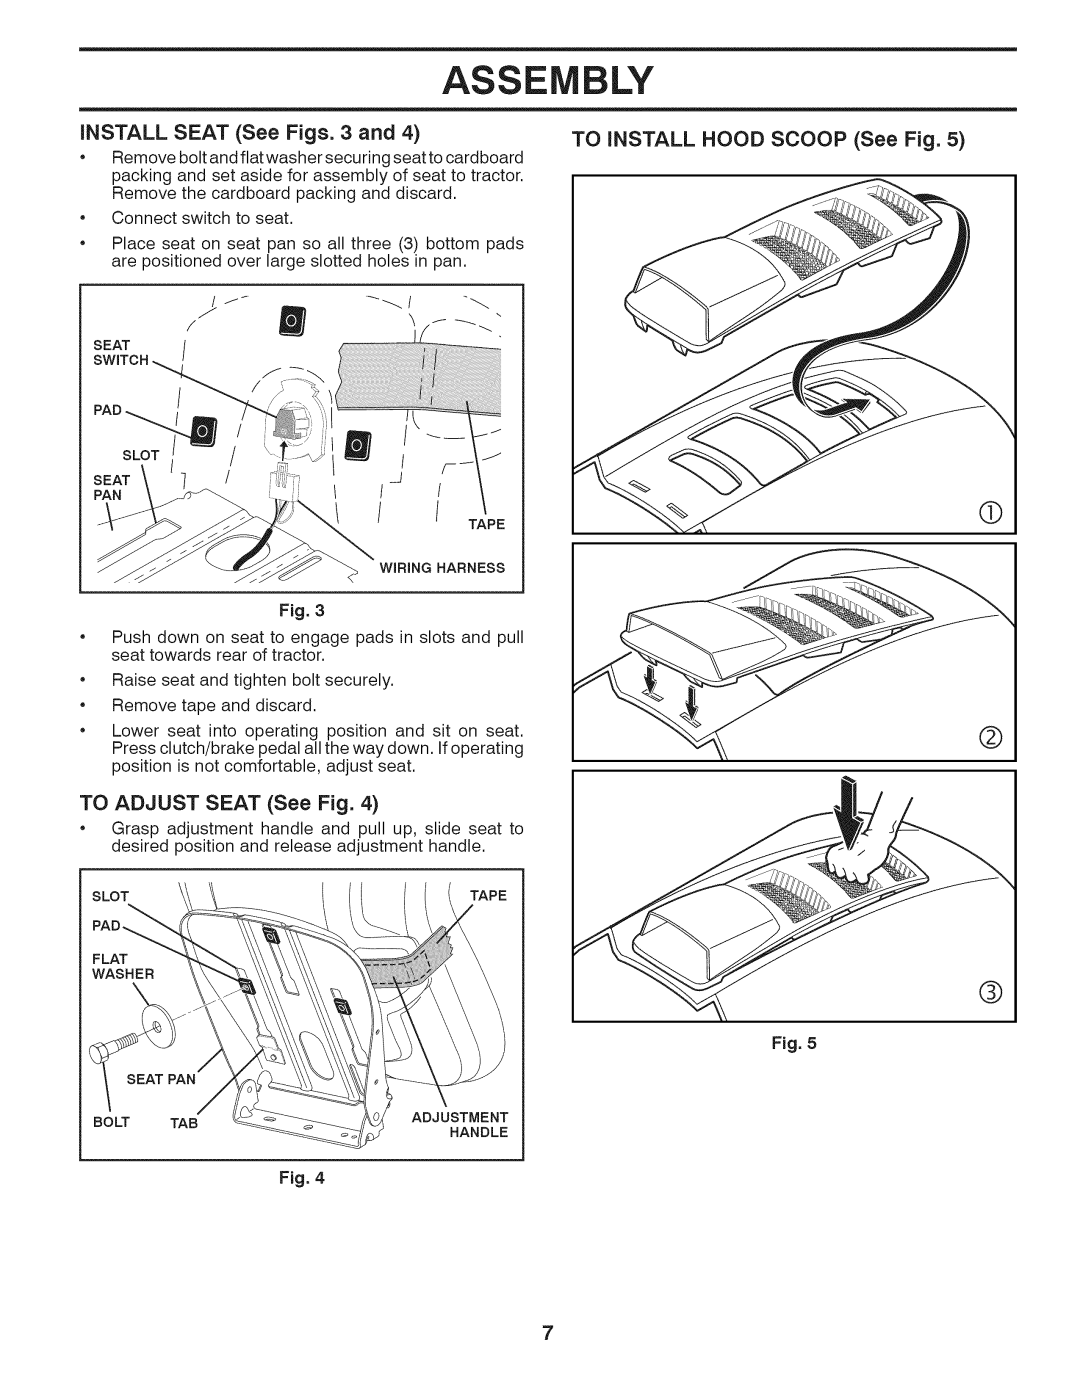 Husqvarna LTH18538 Assembly, iNSTALL SEAT See Figs. 3 and, TO INSTALL HOOD SCOOP See Fig, TO ADJUST SEAT See Fig 